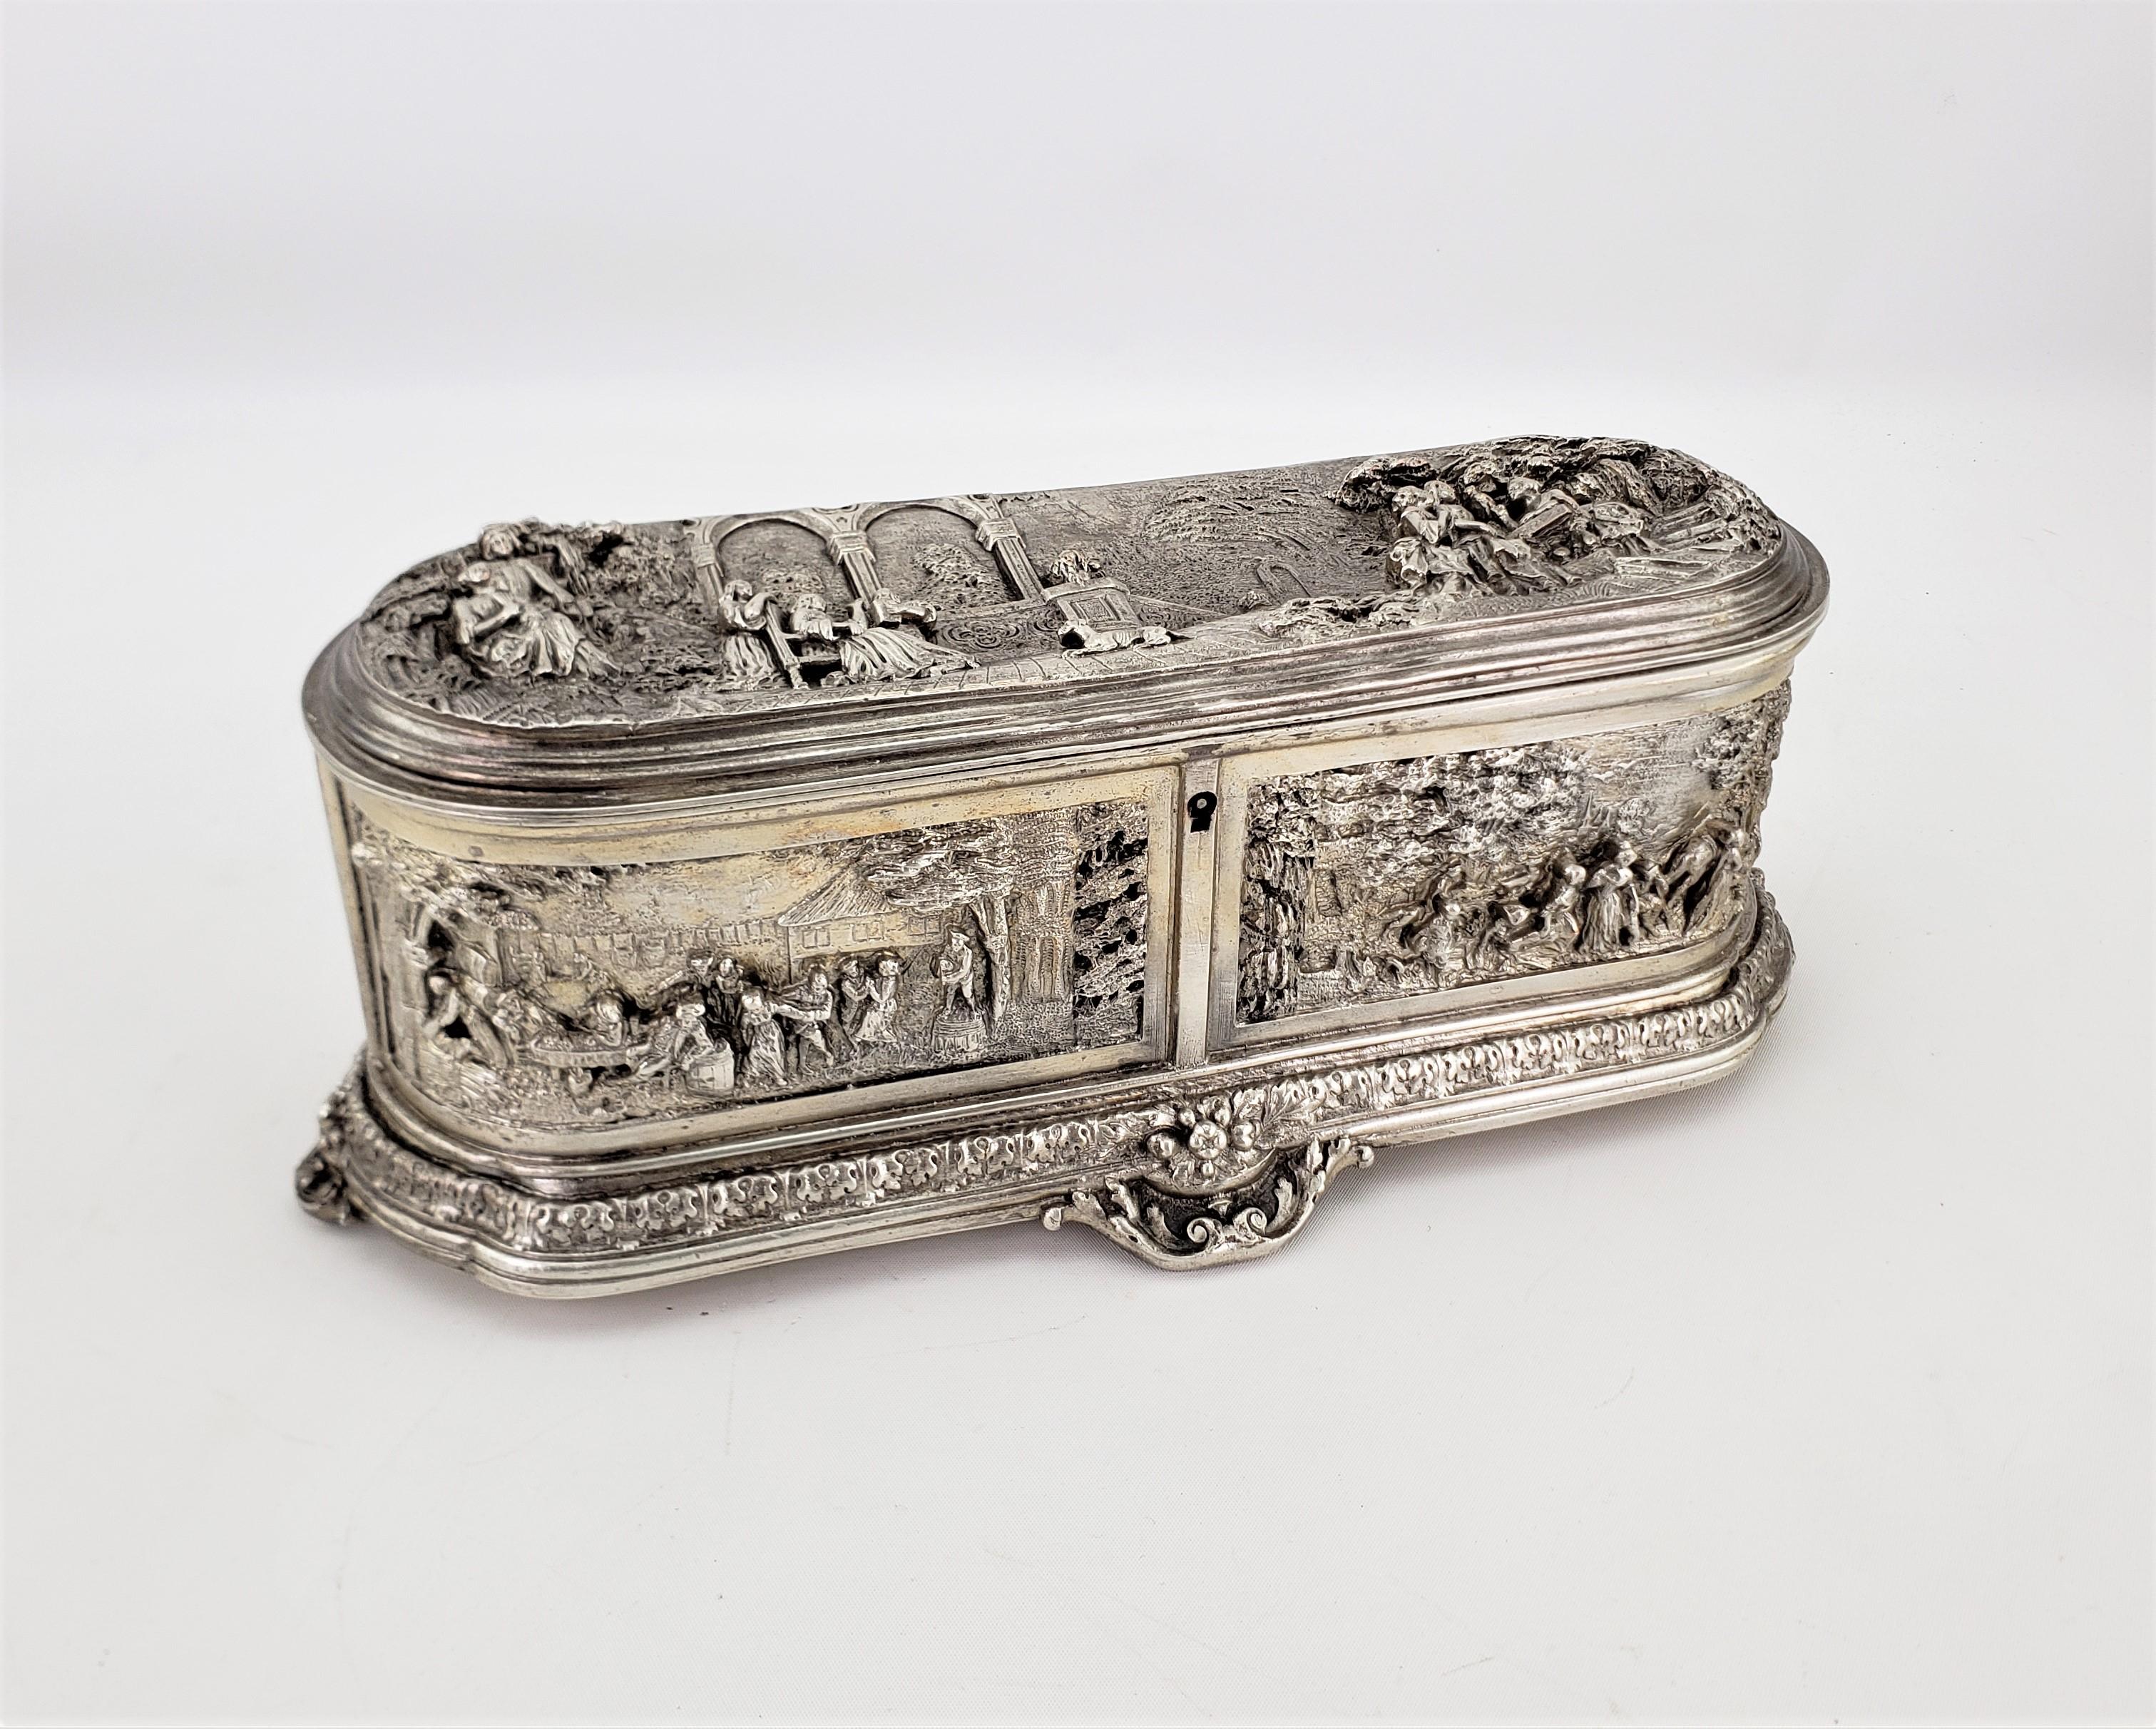 This large and antique jewelry casket is unsigned, but presumed to have originated from France and dates to approximately 1920 and done in a Renaissance Revival style. The jewelry box is composed of pressed metal with a black patination and depicts